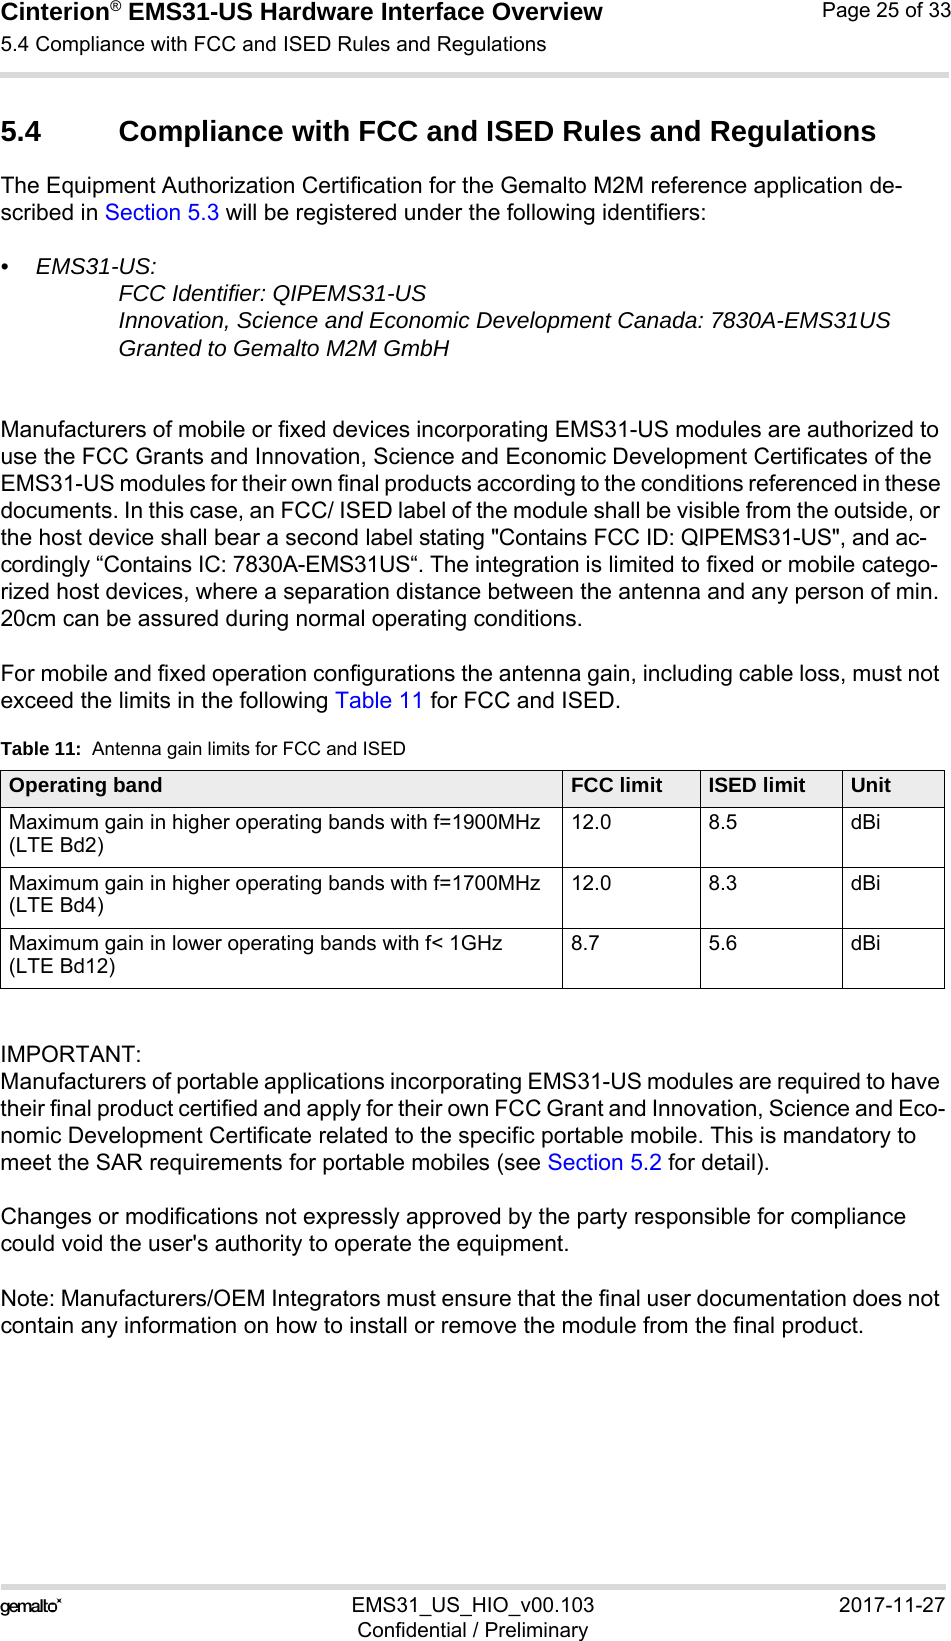 Cinterion® EMS31-US Hardware Interface Overview5.4 Compliance with FCC and ISED Rules and Regulations26EMS31_US_HIO_v00.103 2017-11-27Confidential / PreliminaryPage 25 of 335.4 Compliance with FCC and ISED Rules and RegulationsThe Equipment Authorization Certification for the Gemalto M2M reference application de-scribed in Section 5.3 will be registered under the following identifiers:• EMS31-US:FCC Identifier: QIPEMS31-US Innovation, Science and Economic Development Canada: 7830A-EMS31USGranted to Gemalto M2M GmbH Manufacturers of mobile or fixed devices incorporating EMS31-US modules are authorized to use the FCC Grants and Innovation, Science and Economic Development Certificates of the EMS31-US modules for their own final products according to the conditions referenced in these documents. In this case, an FCC/ ISED label of the module shall be visible from the outside, or the host device shall bear a second label stating &quot;Contains FCC ID: QIPEMS31-US&quot;, and ac-cordingly “Contains IC: 7830A-EMS31US“. The integration is limited to fixed or mobile catego-rized host devices, where a separation distance between the antenna and any person of min. 20cm can be assured during normal operating conditions.For mobile and fixed operation configurations the antenna gain, including cable loss, must not exceed the limits in the following Table 11 for FCC and ISED.IMPORTANT: Manufacturers of portable applications incorporating EMS31-US modules are required to have their final product certified and apply for their own FCC Grant and Innovation, Science and Eco-nomic Development Certificate related to the specific portable mobile. This is mandatory to meet the SAR requirements for portable mobiles (see Section 5.2 for detail).Changes or modifications not expressly approved by the party responsible for compliance could void the user&apos;s authority to operate the equipment.Note: Manufacturers/OEM Integrators must ensure that the final user documentation does not contain any information on how to install or remove the module from the final product.Table 11:  Antenna gain limits for FCC and ISEDOperating band FCC limit ISED limit UnitMaximum gain in higher operating bands with f=1900MHz(LTE Bd2)12.0 8.5 dBiMaximum gain in higher operating bands with f=1700MHz(LTE Bd4)12.0 8.3 dBiMaximum gain in lower operating bands with f&lt; 1GHz(LTE Bd12)8.7 5.6 dBi